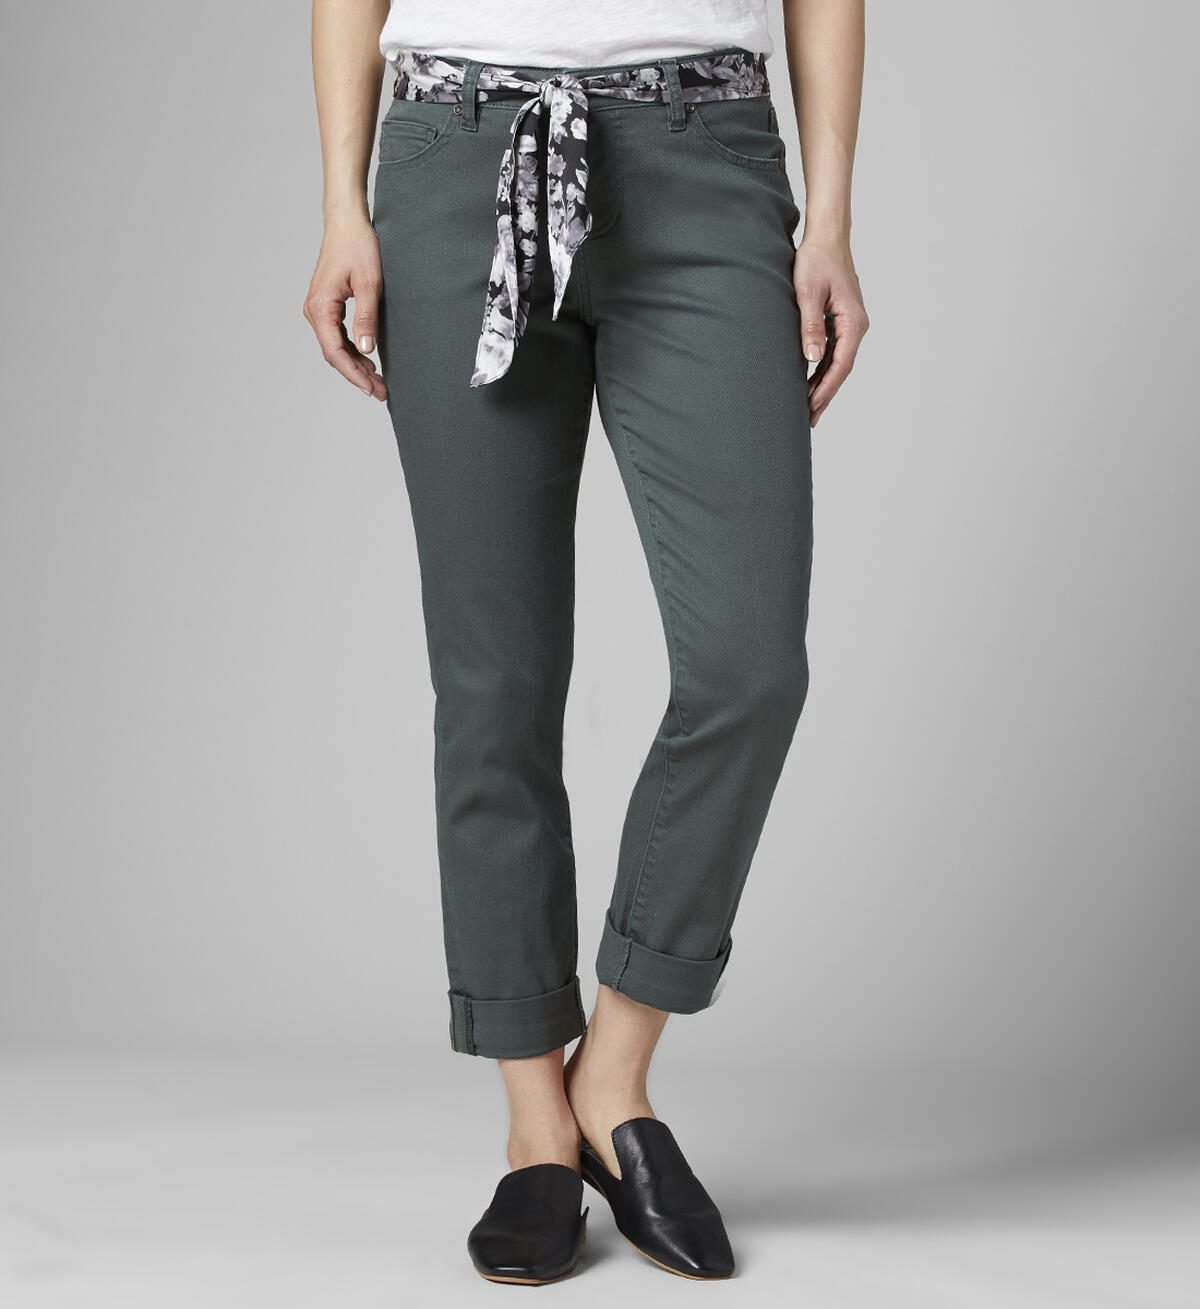 Carter Mid Rise Girlfriend Jeans with Satin Belt, , hi-res image number 1